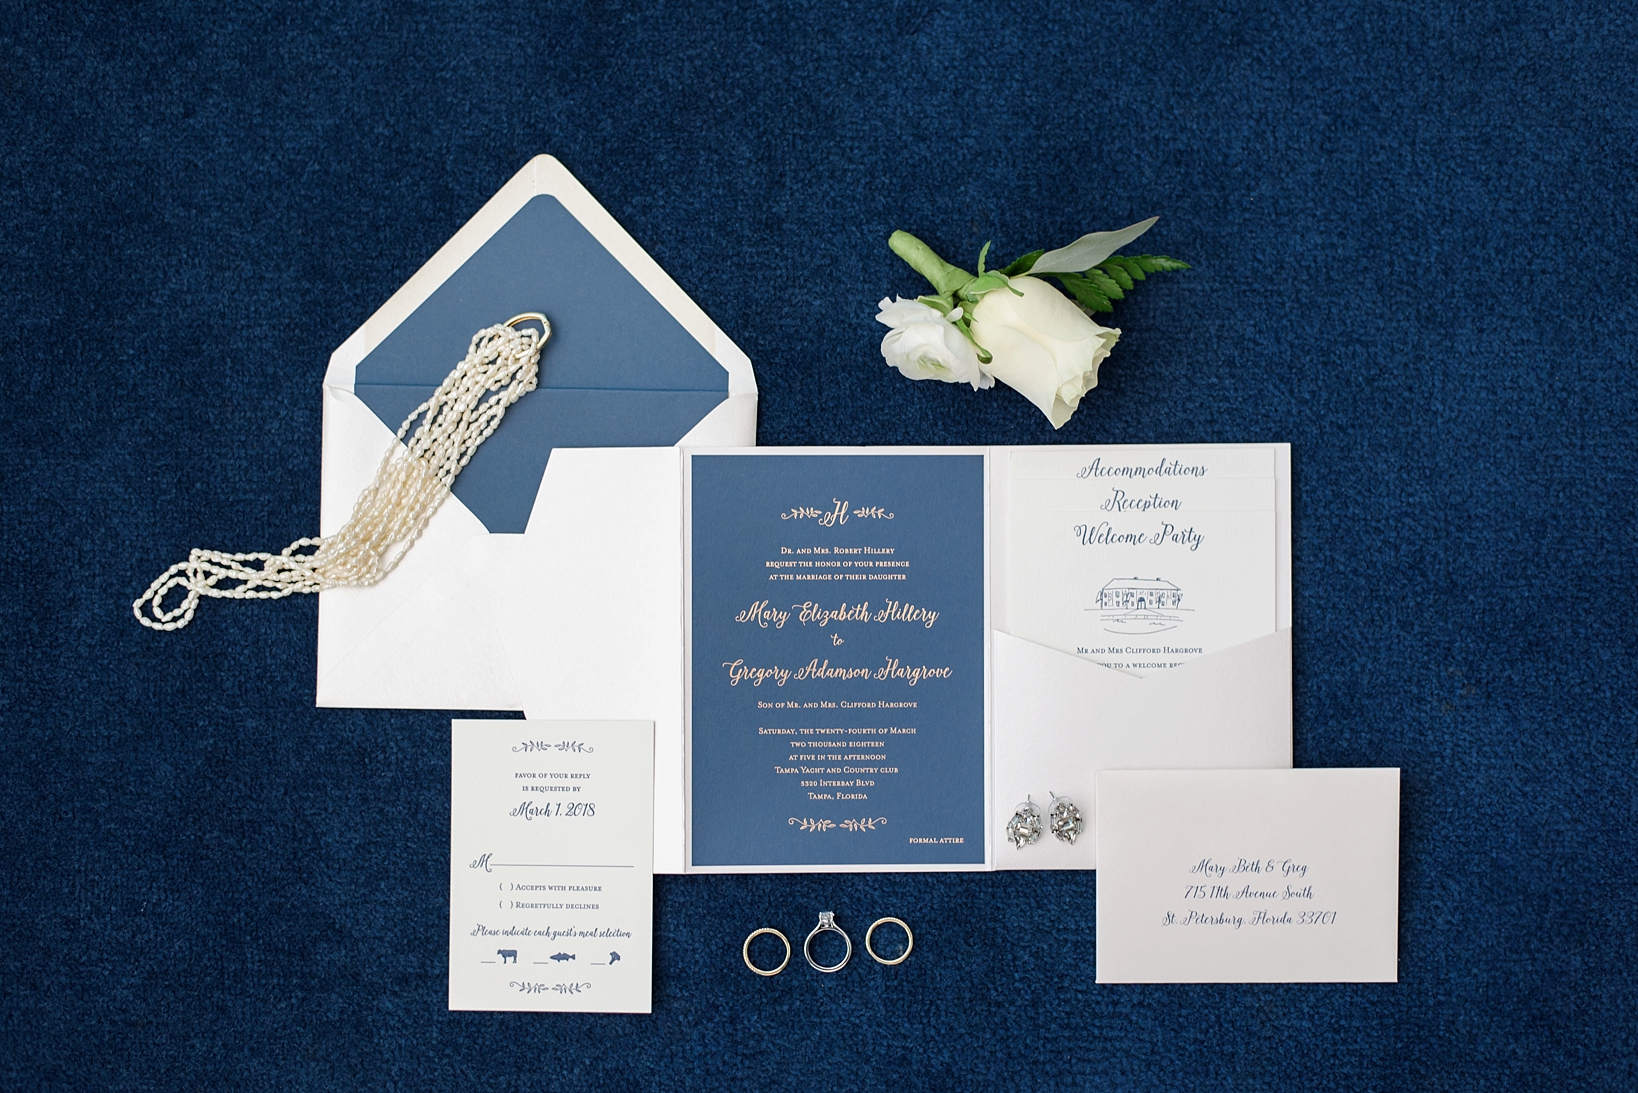 Wedding invitation suite of navy blue and pearls